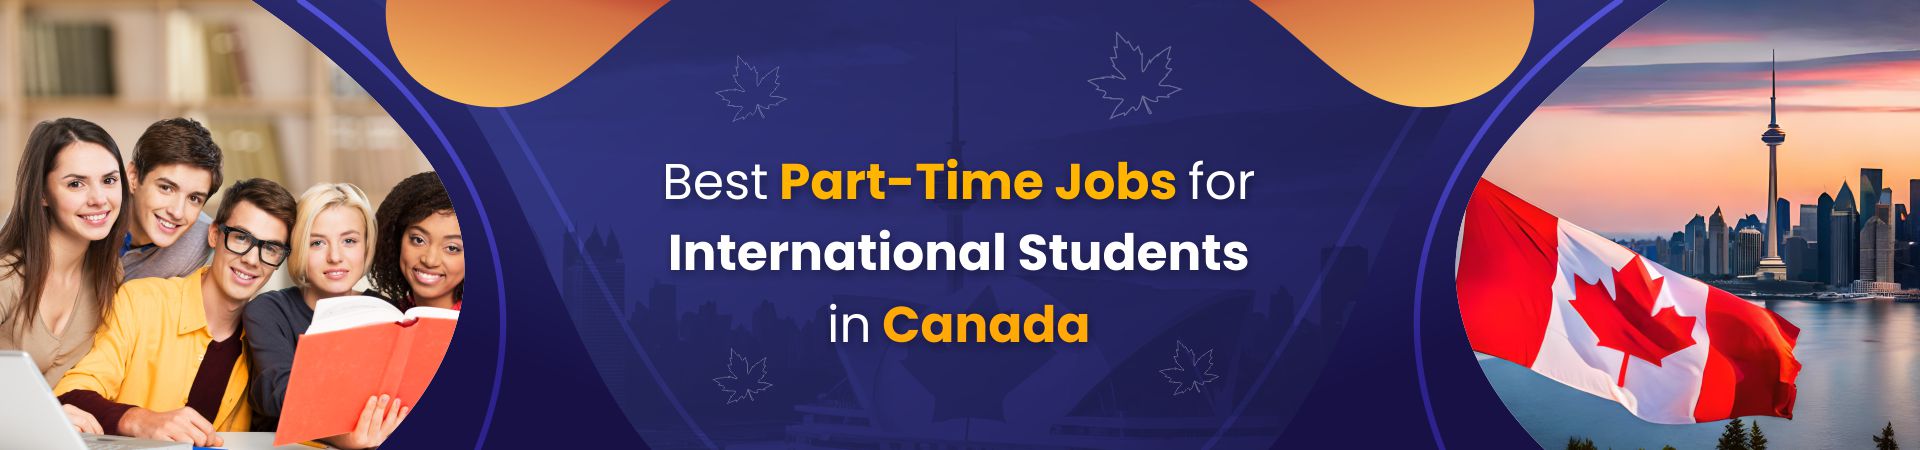 Best Part-Time Jobs for International Students in Canada